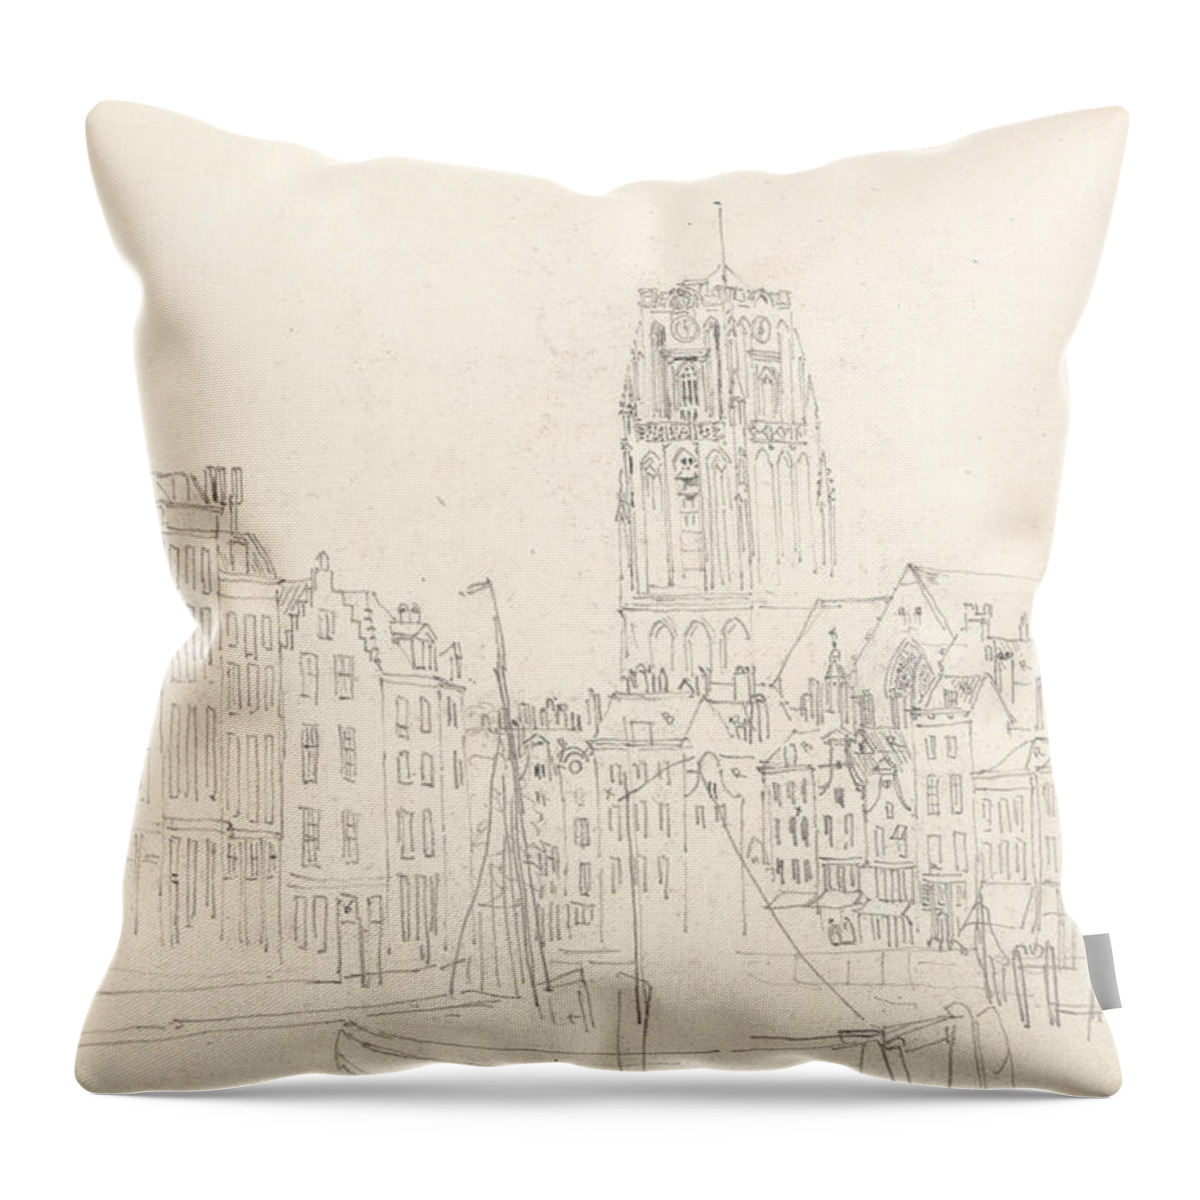 19th Century Art Throw Pillow featuring the drawing The Church of St. Lawrence by David Cox